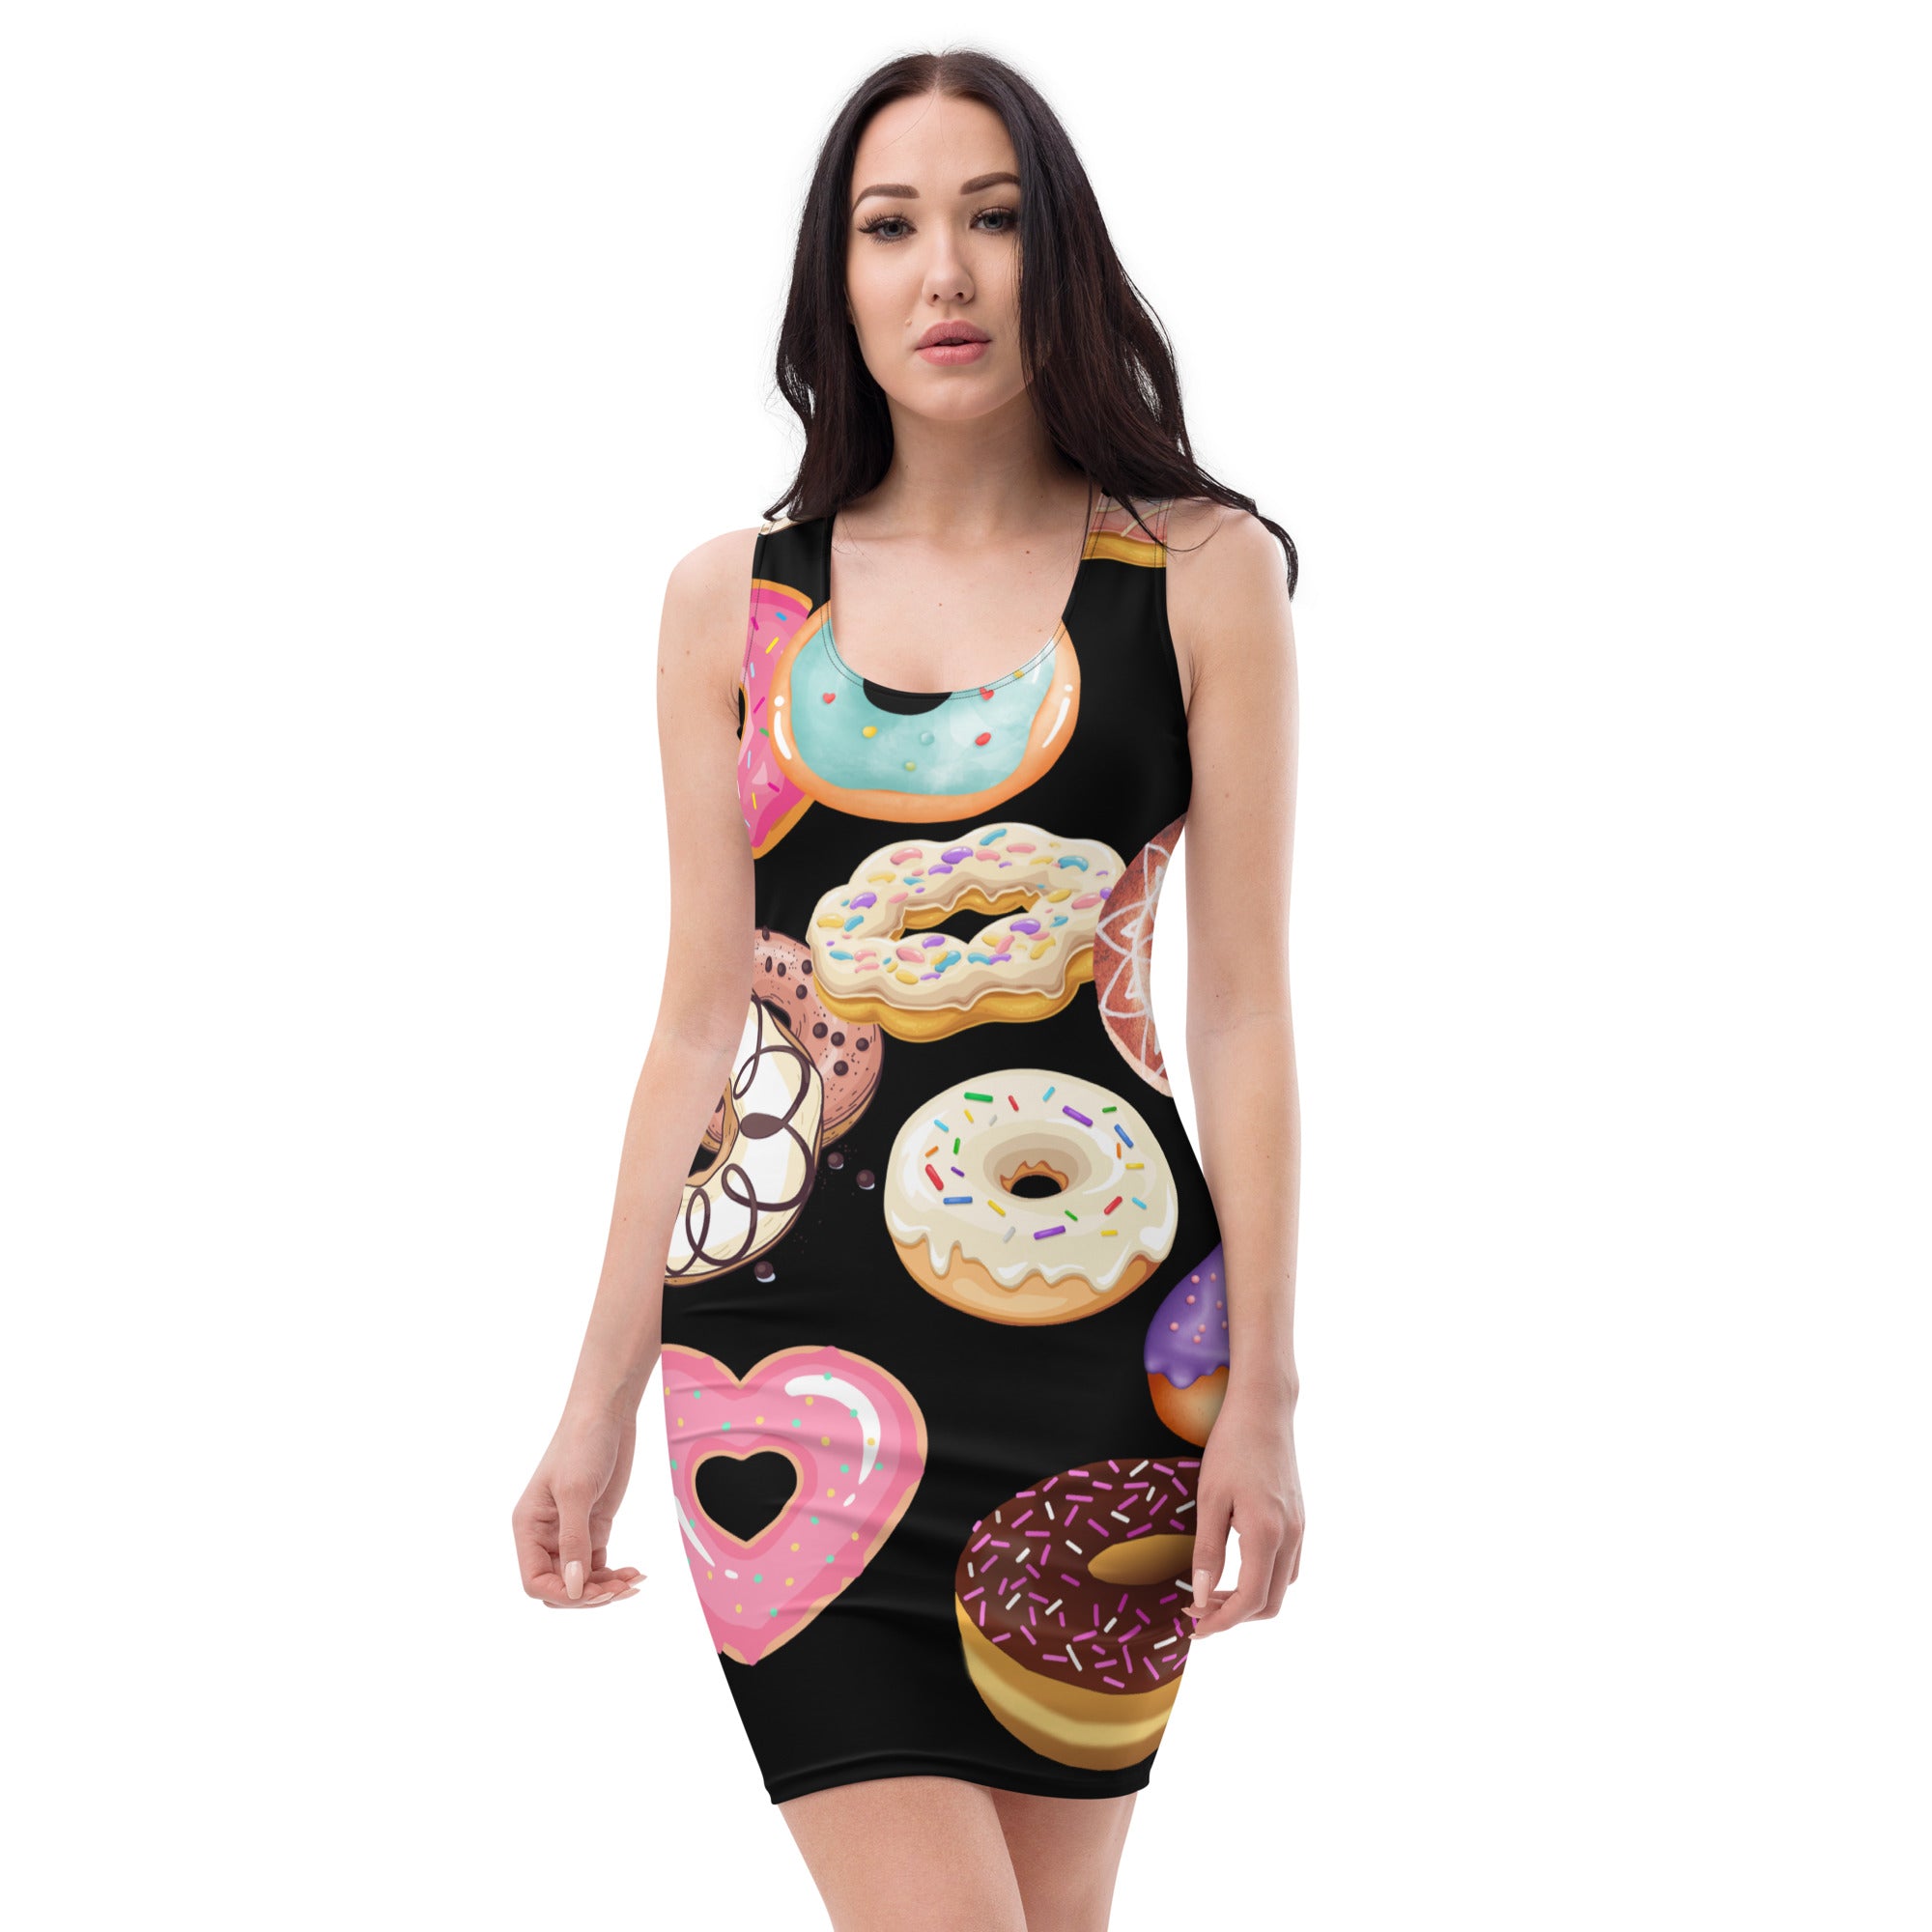 "Indulge in Sweet Style: Delicious Donuts Fitted Dress", lioness-love